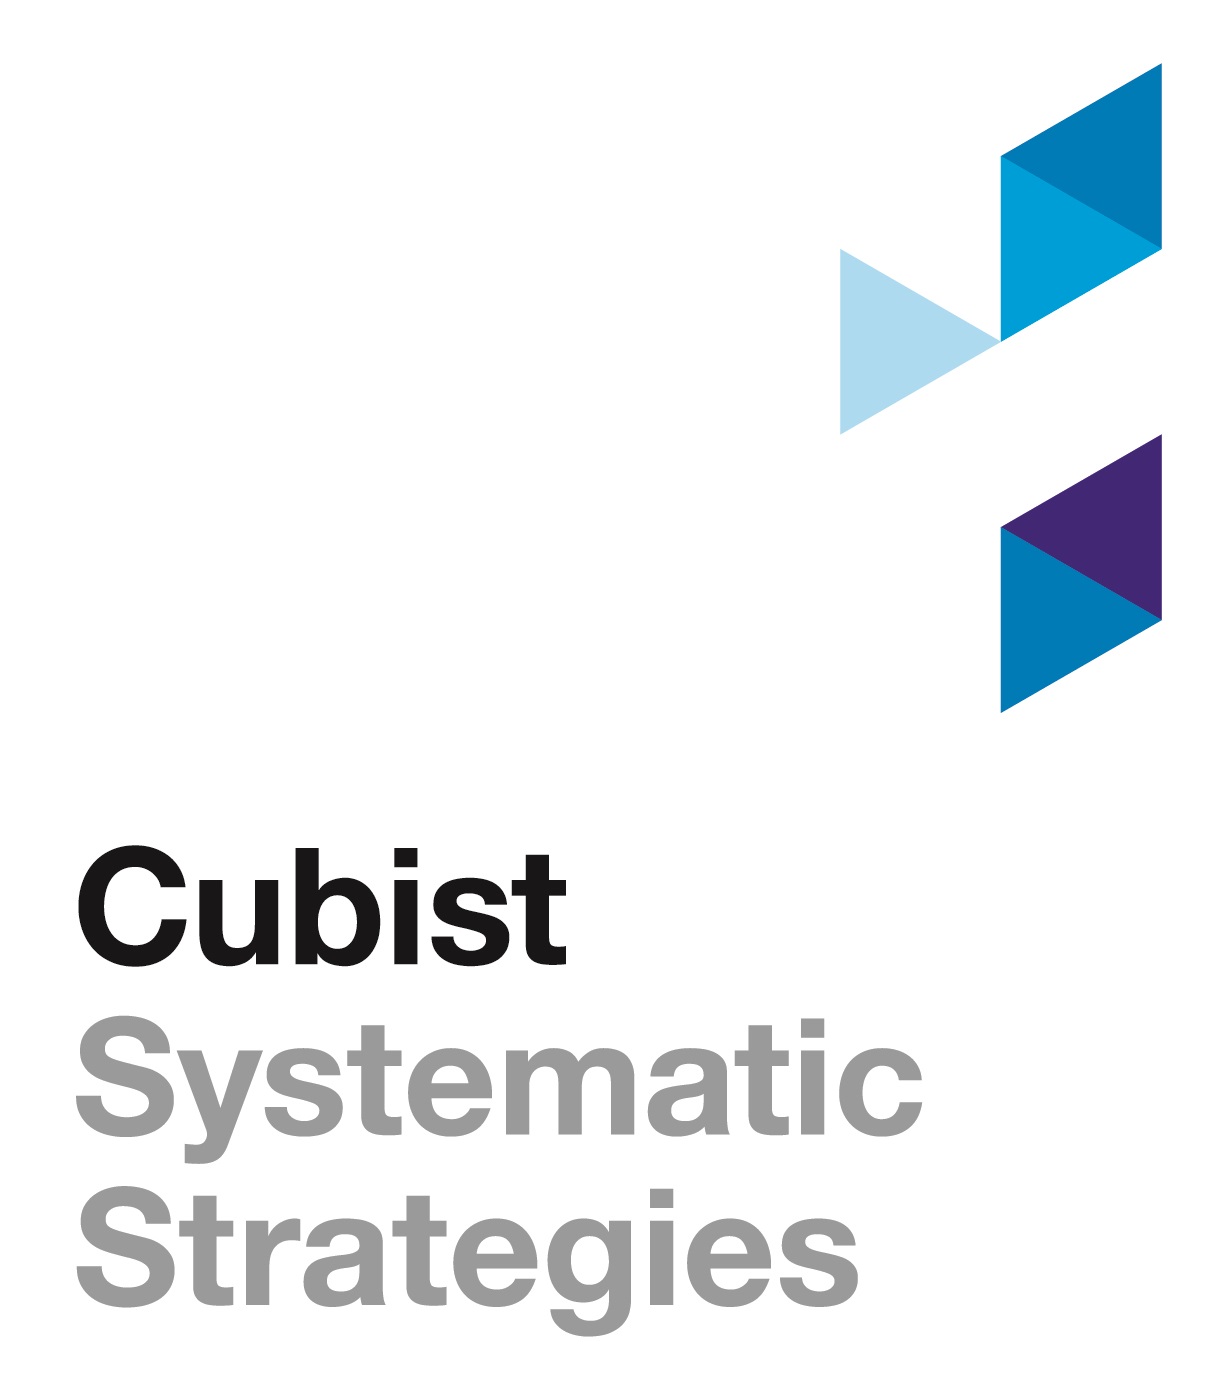 Cubist Systematic Strategies